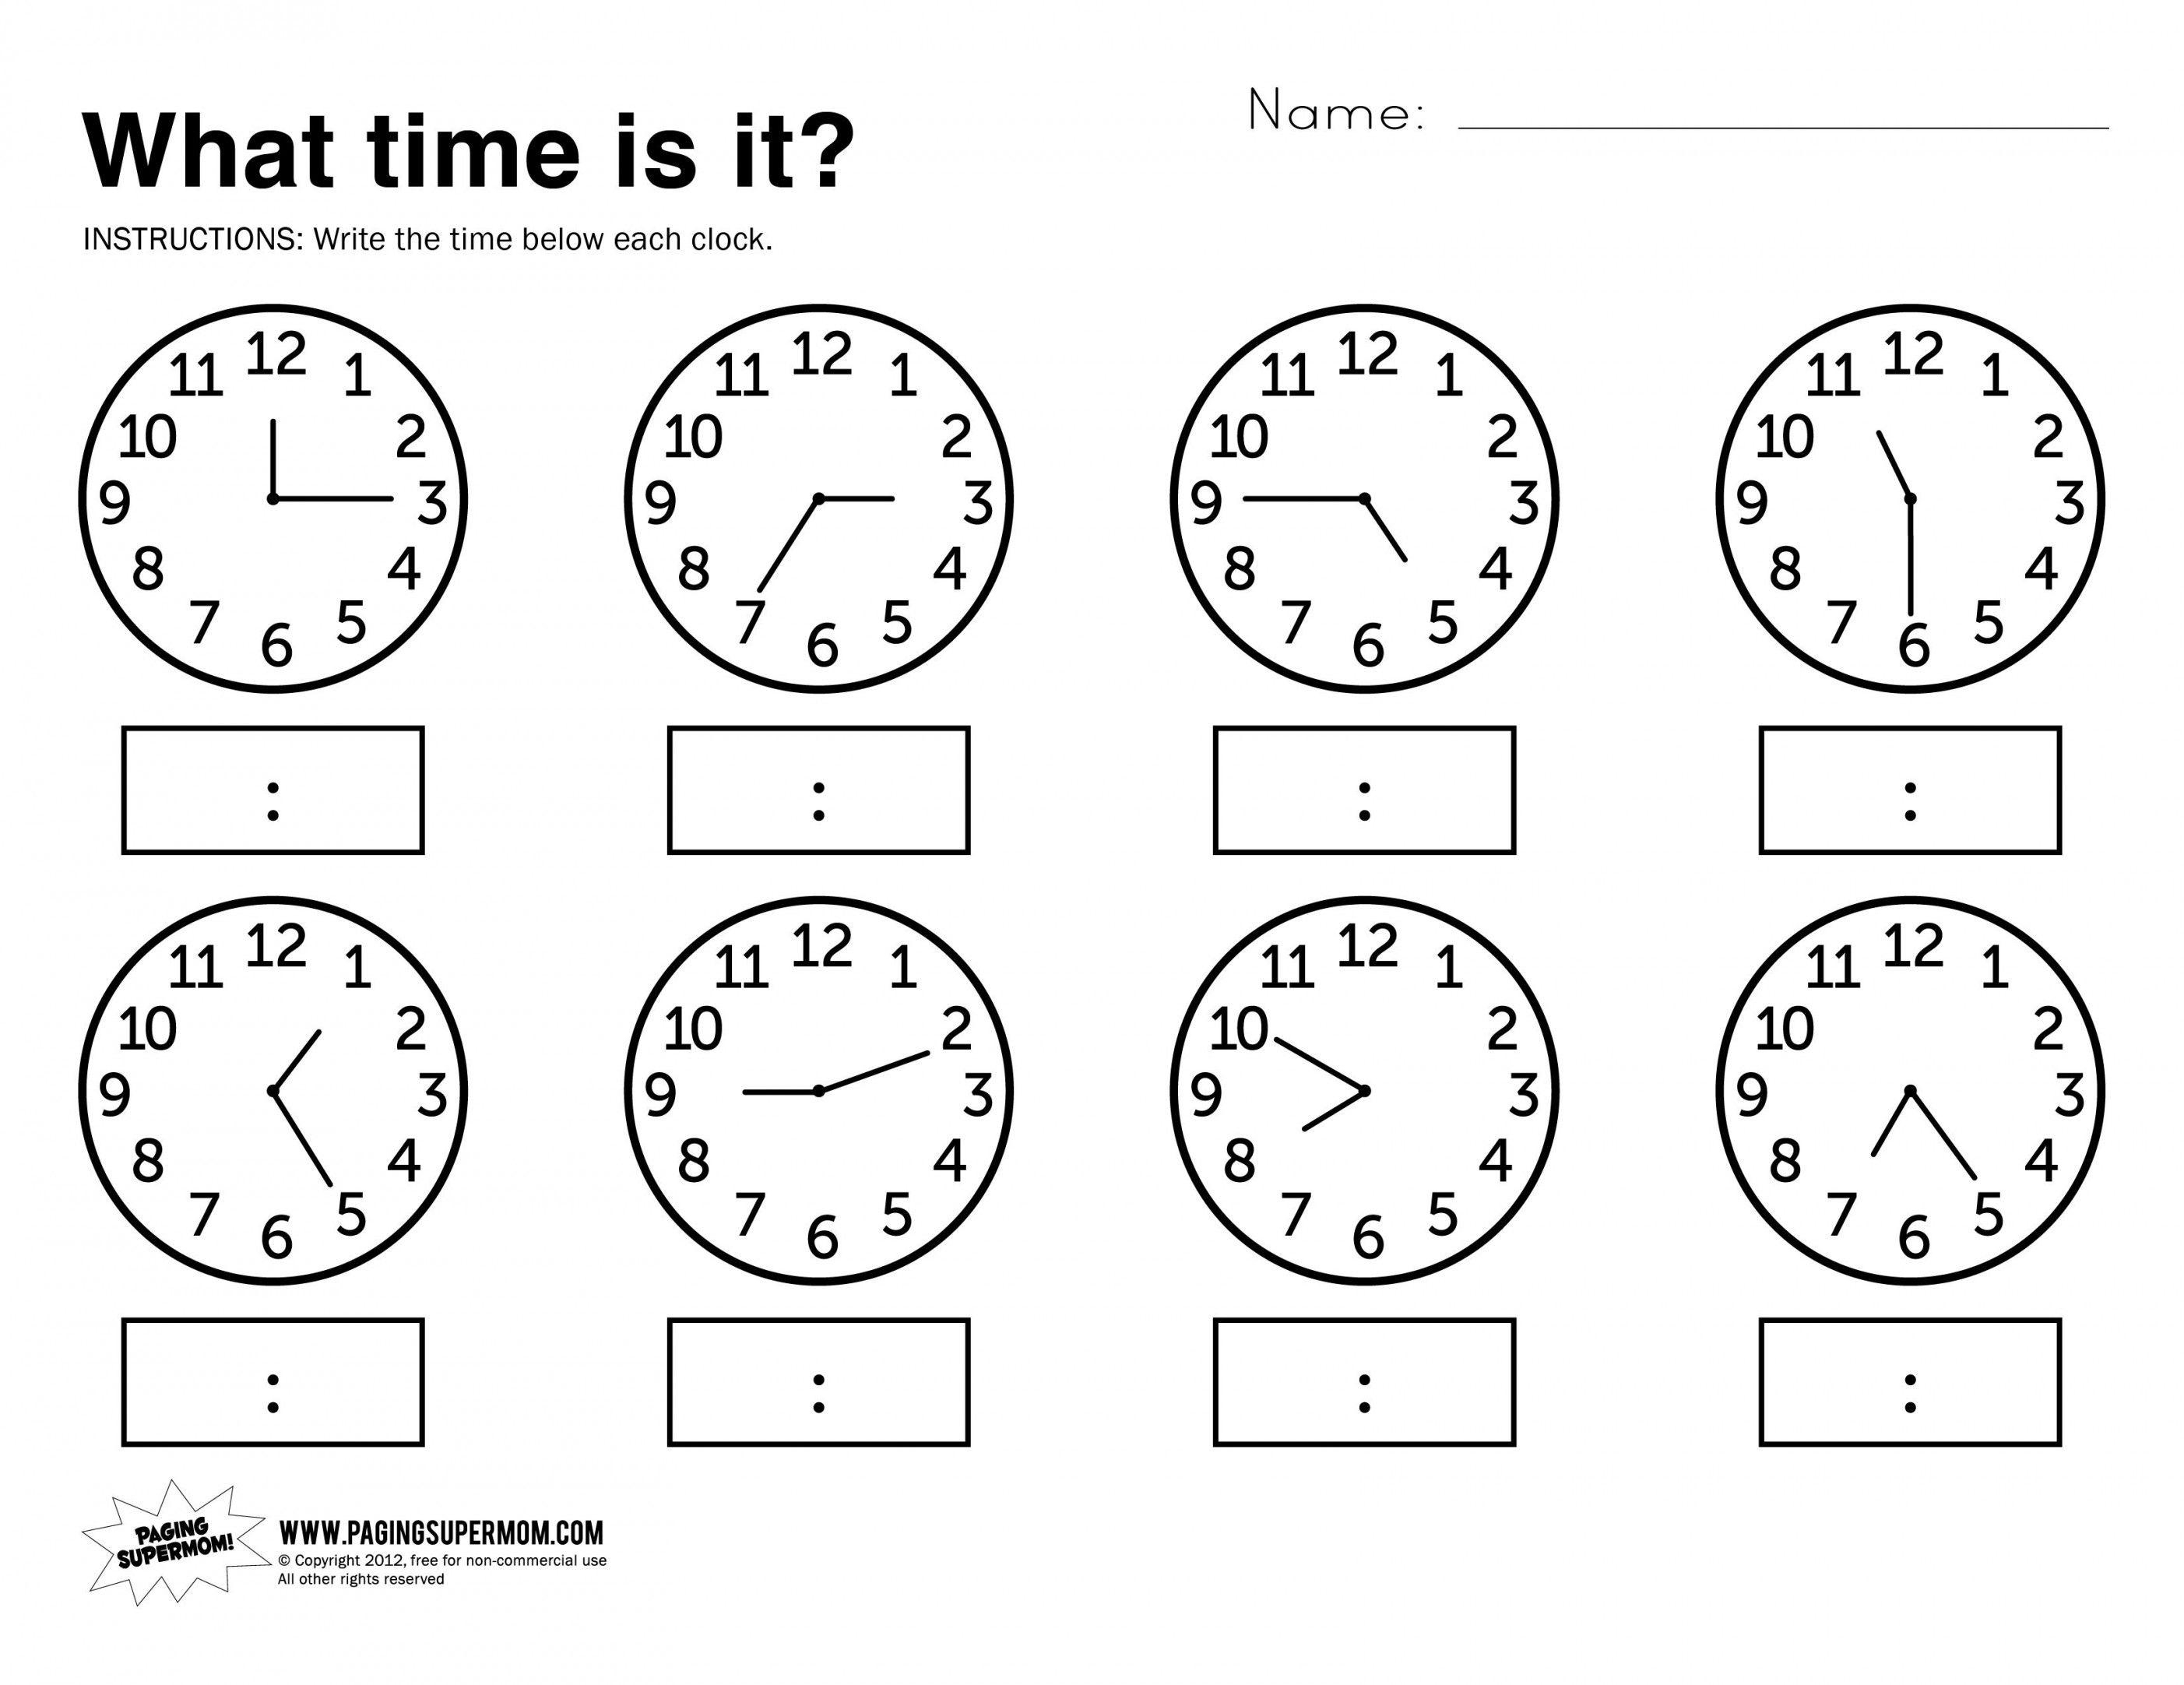 Telling Time Worksheets Grade 3 | Lostranquillos - Free Printable | Telling Time Worksheet Printable